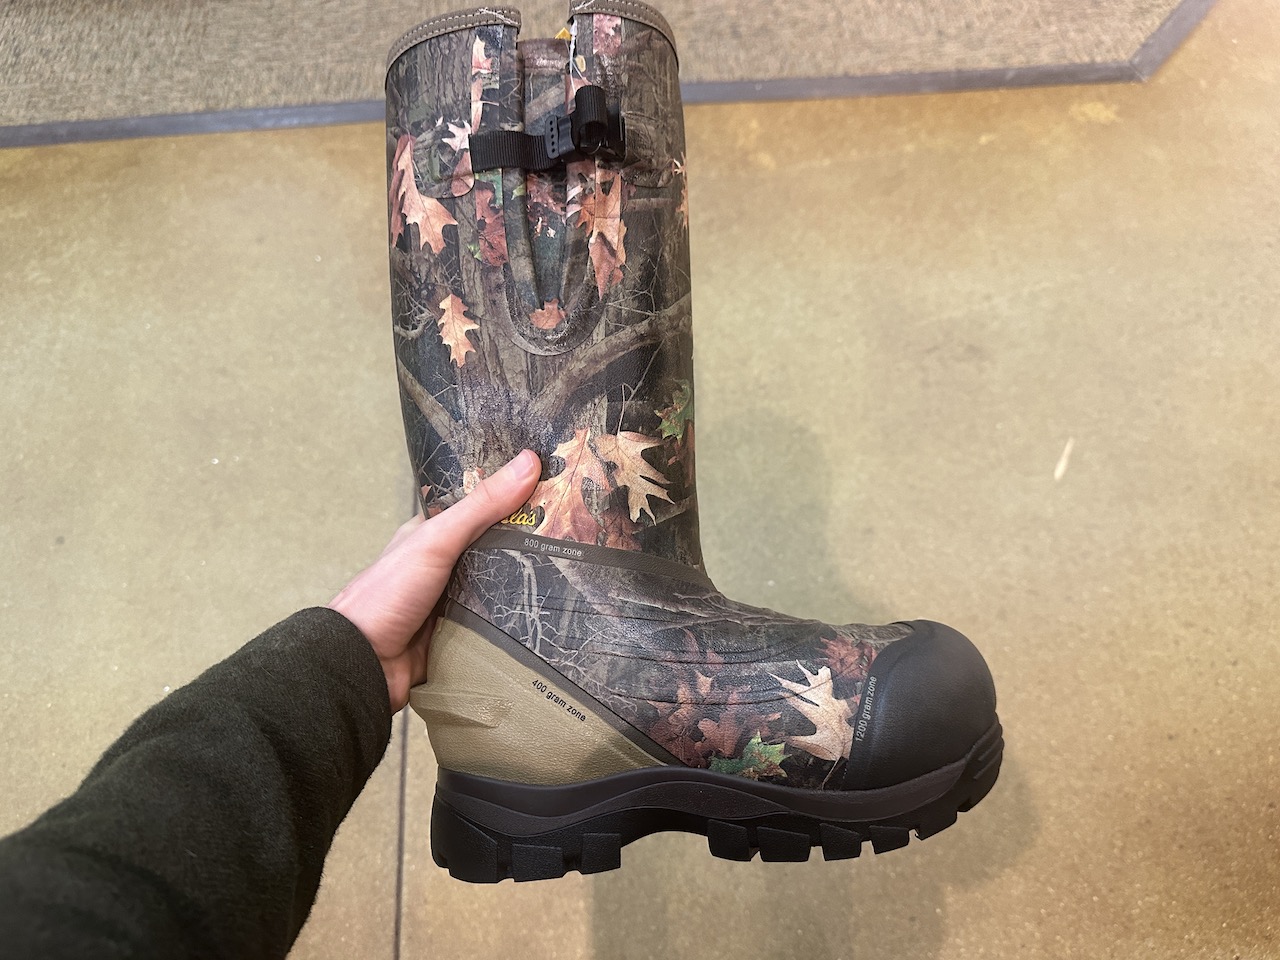 Cabela's Zoned Comfort Trac 1200g Insulated Hunting Boots. Similar to 2000g model.